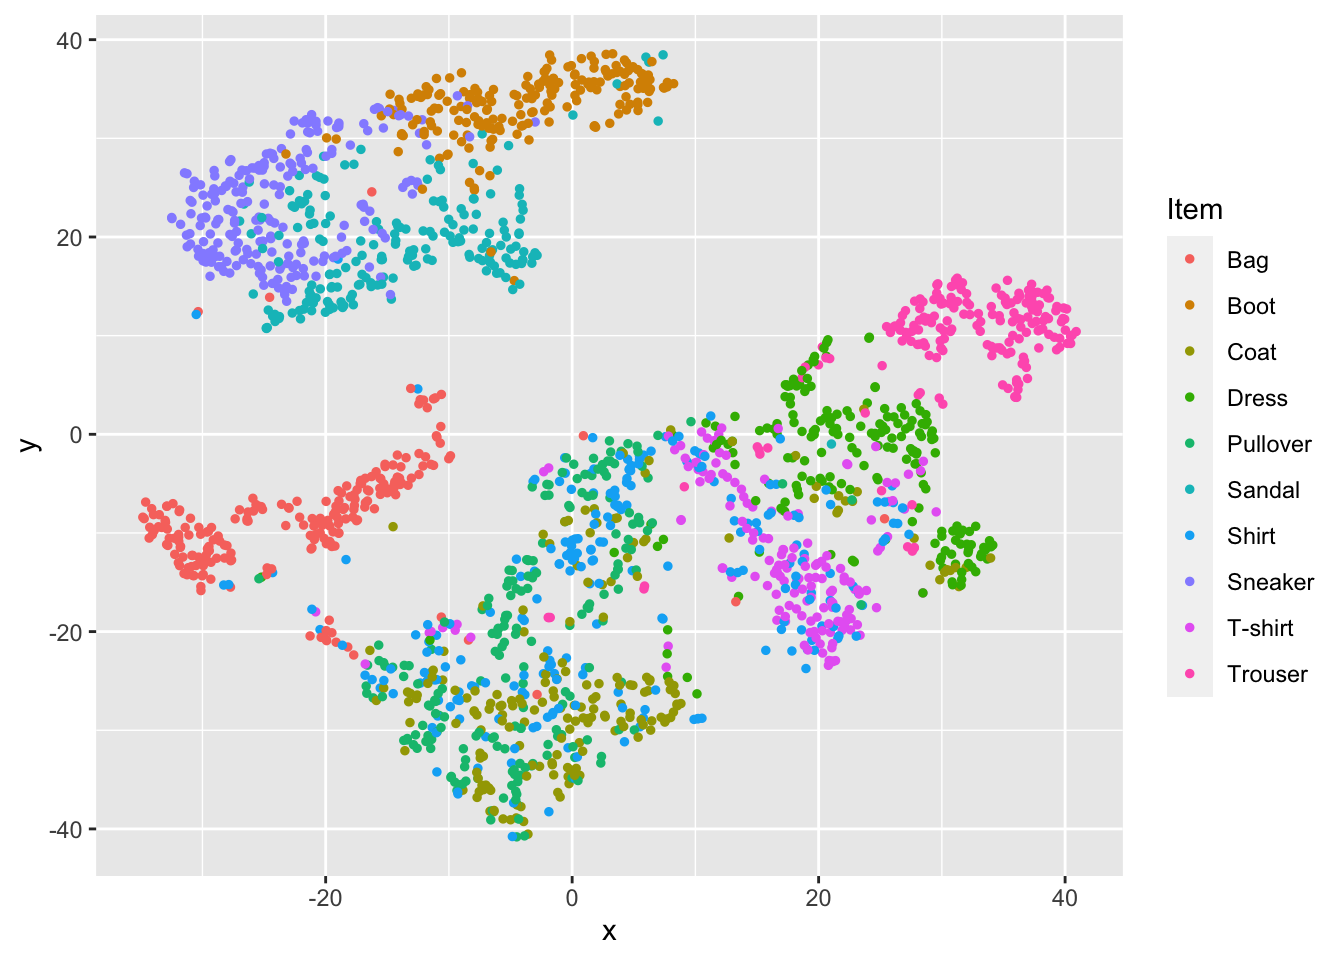 Two-dimensional projection of Fashion MNIST data using t-SNE analysis